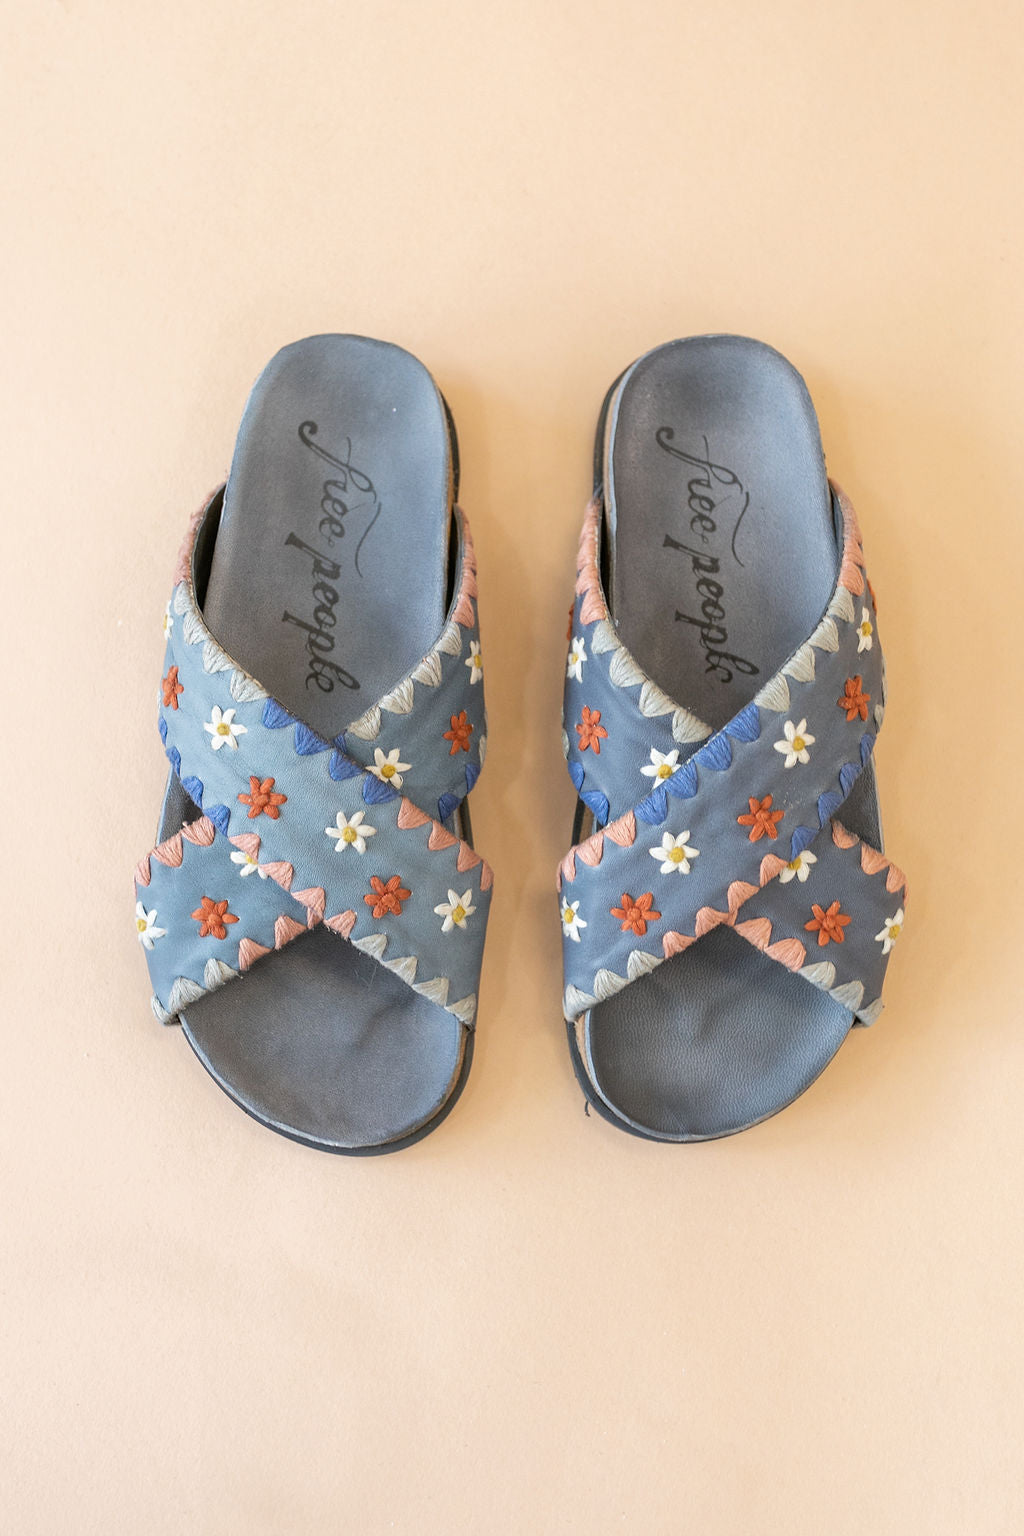 Free People | Wildflowers Crossband Sandals | Washed Midnight - Poppy and Stella